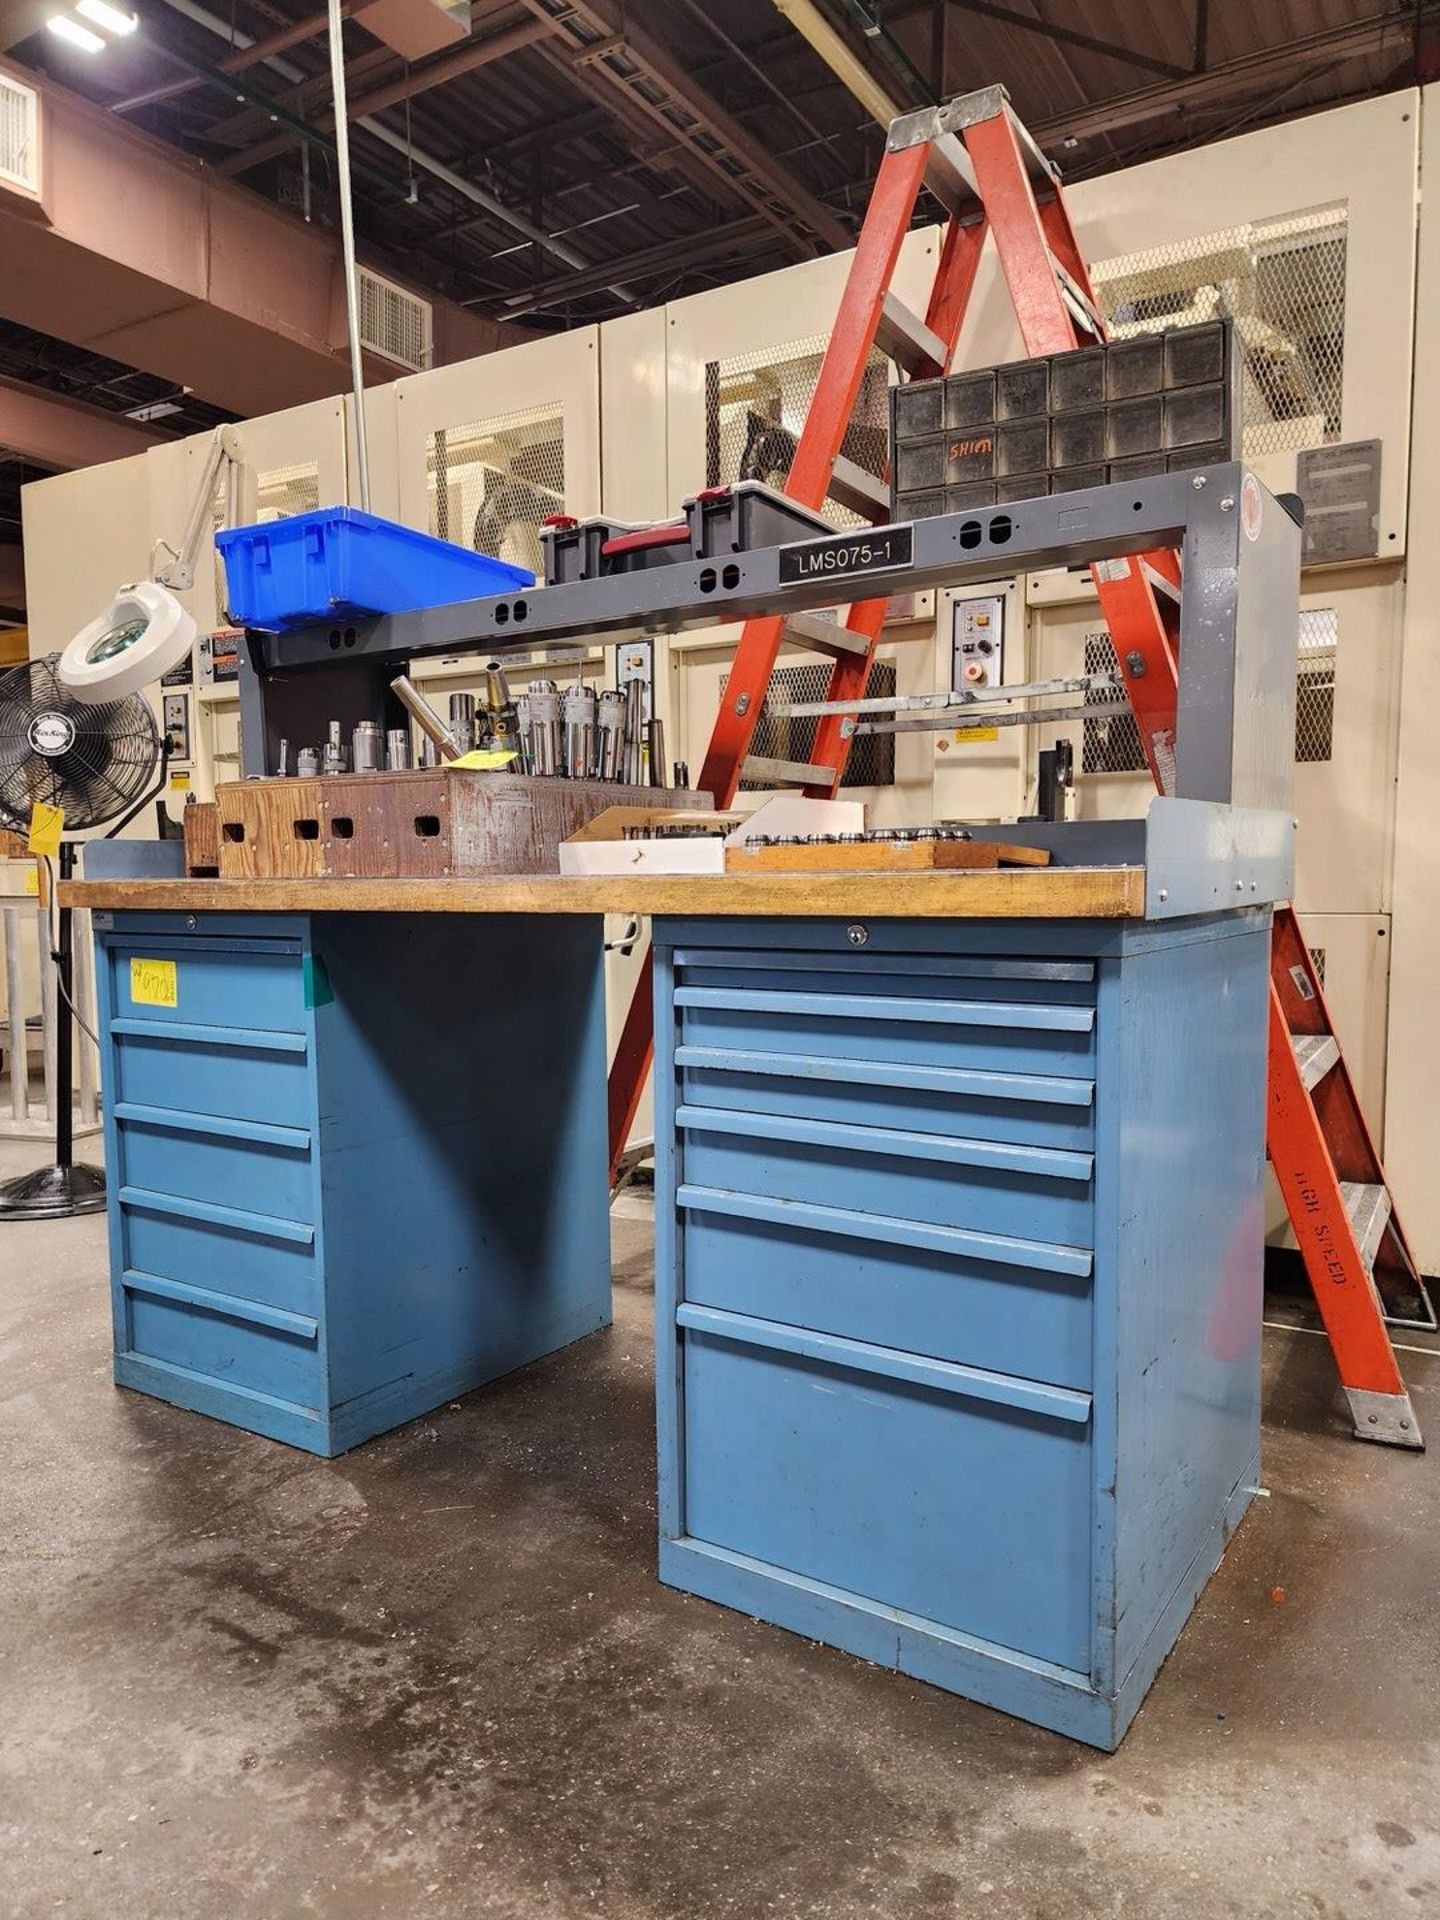 2-Bin Modular Material Cabinet W/ Jig Boring Machine Contents & Other Assorted Contents - Image 2 of 20